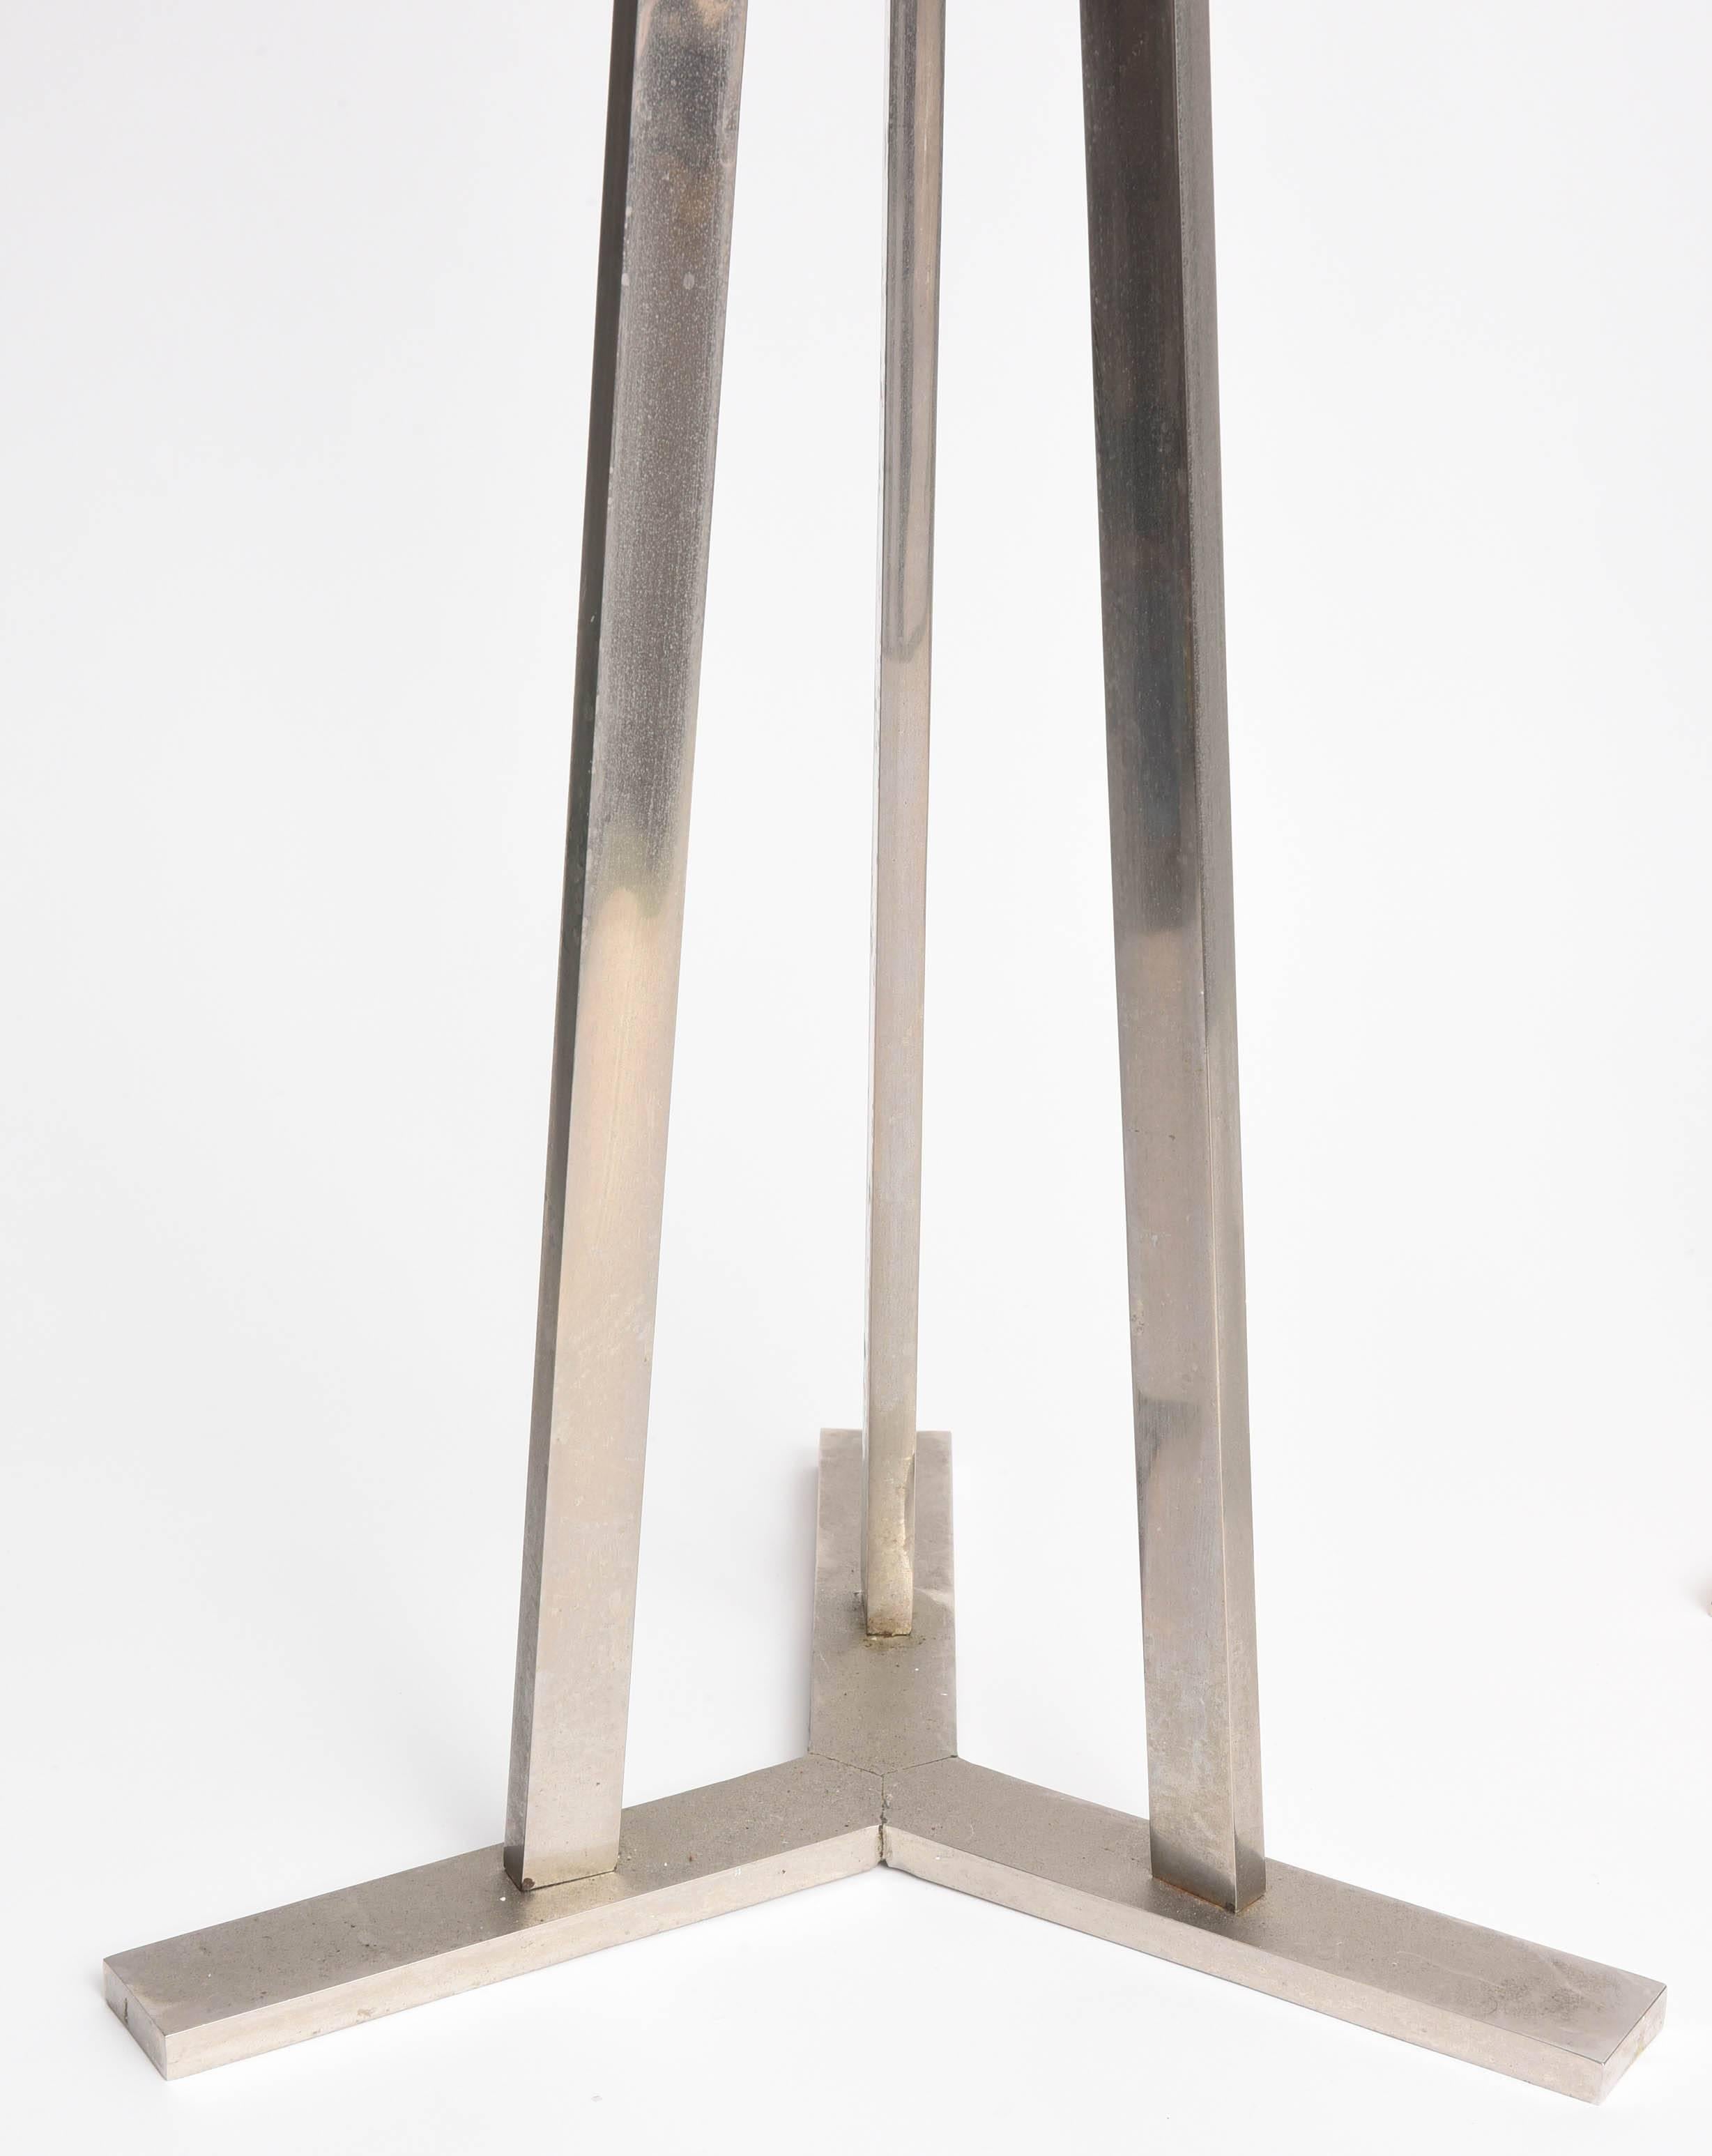 Very large chrome tripod candle stands from the 1970s.  Maybe be used on the floor or tabletop.